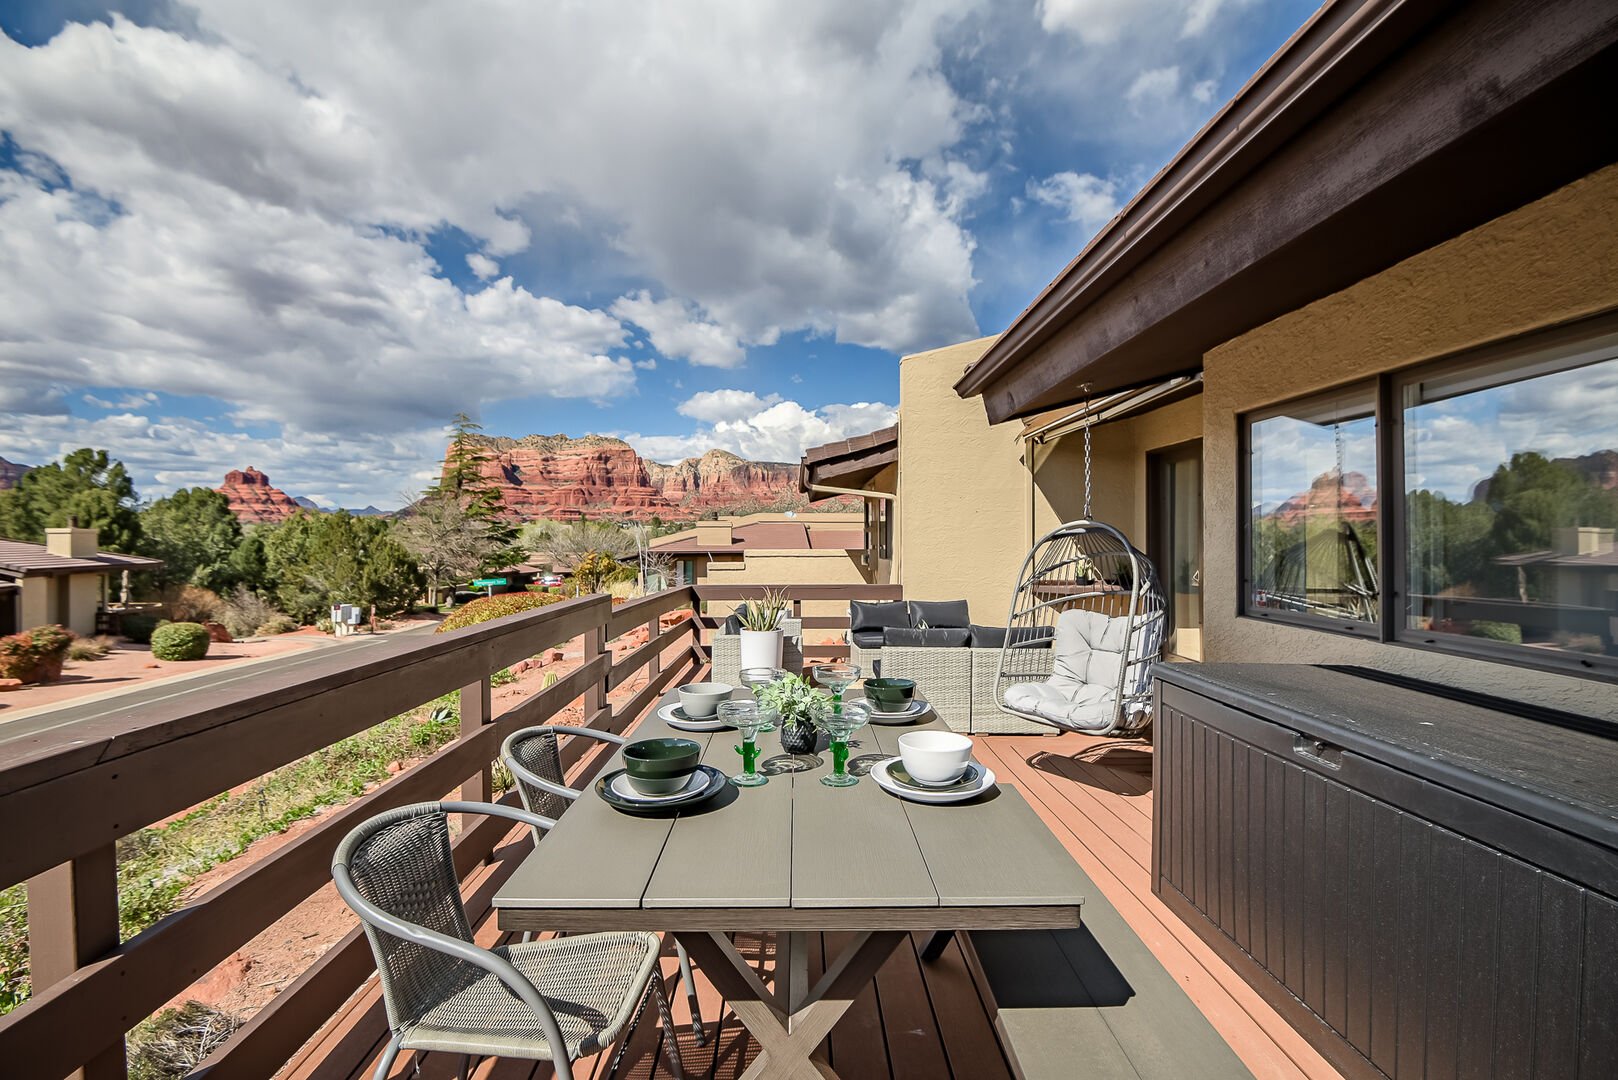 Outdoor patio with seating, outdoor dining, and BBQ grill with red rock views